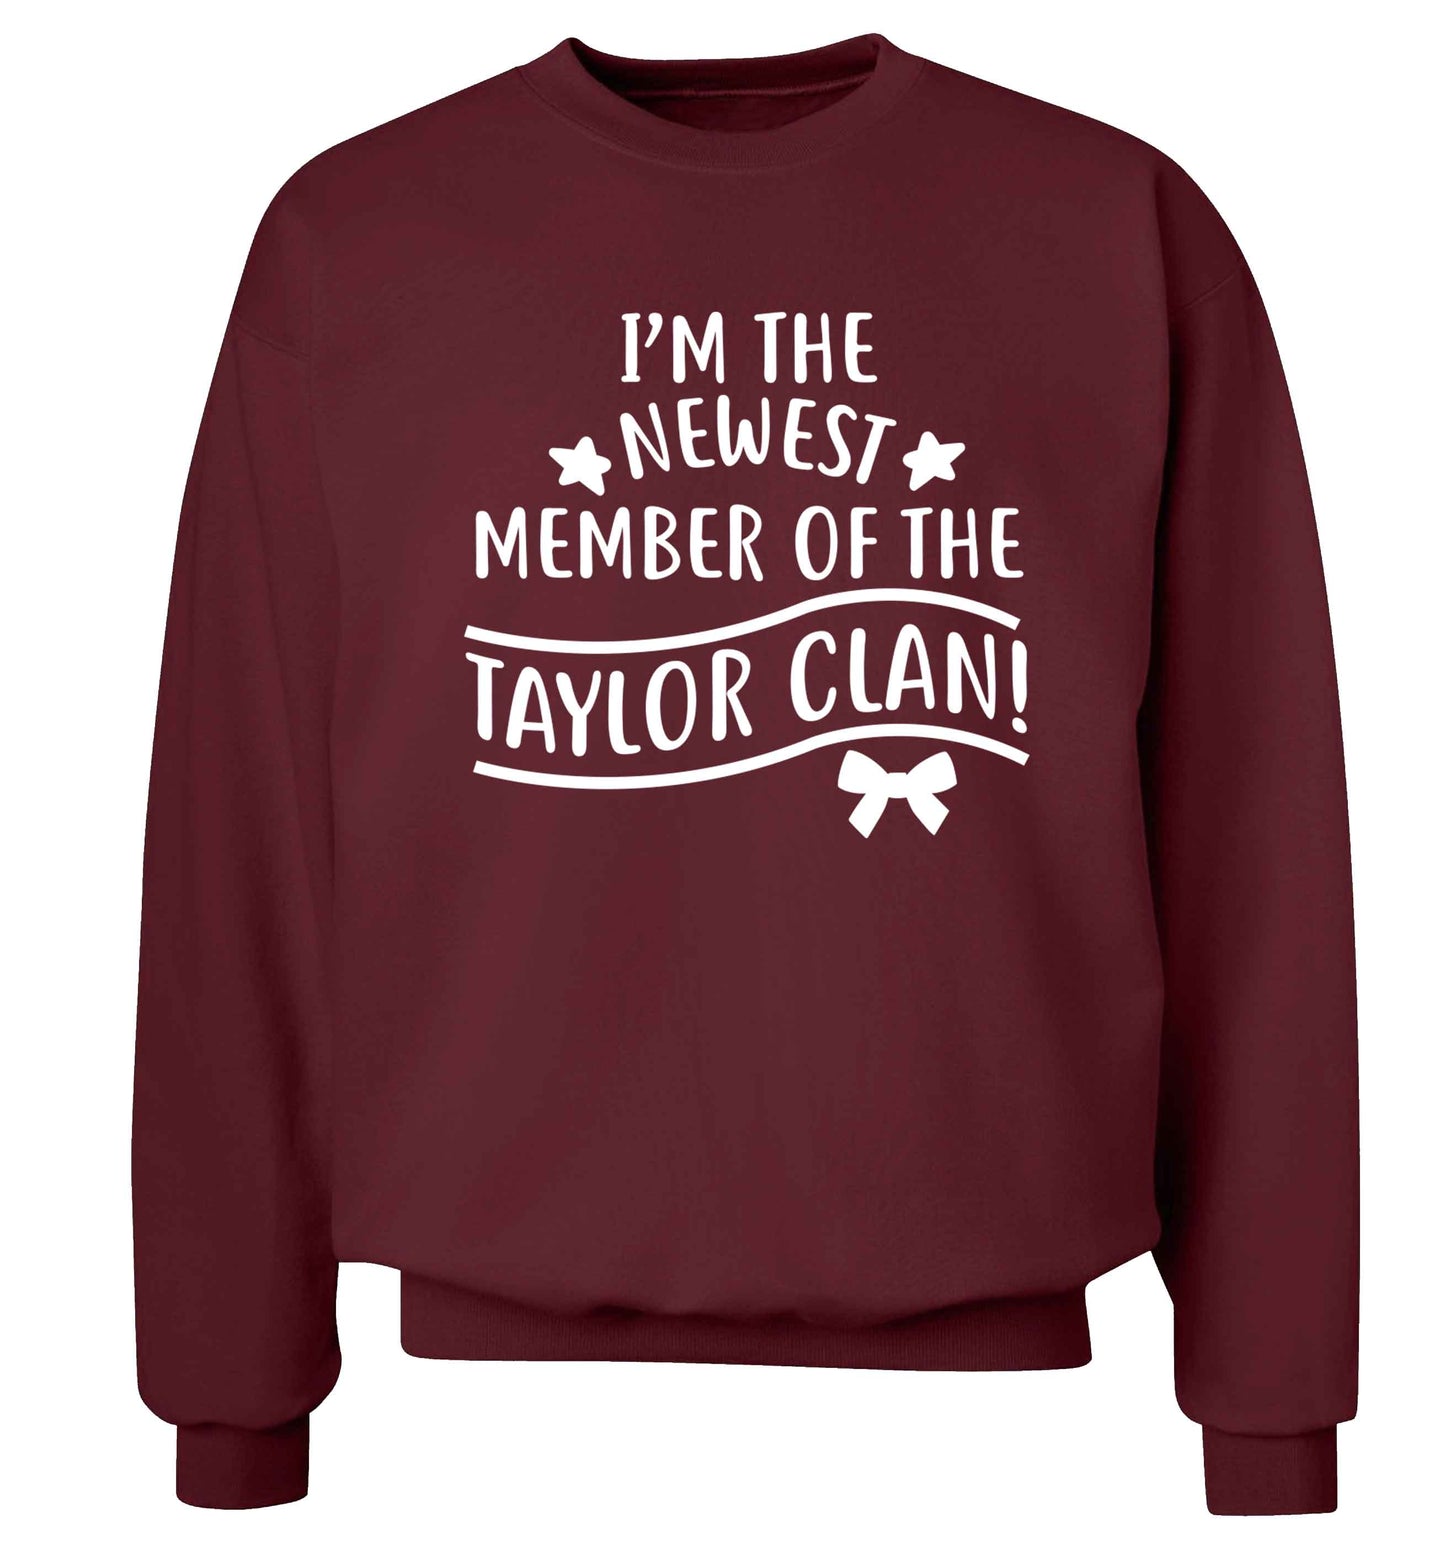 Personalised, newest member of the Taylor clan Adult's unisex maroon Sweater 2XL